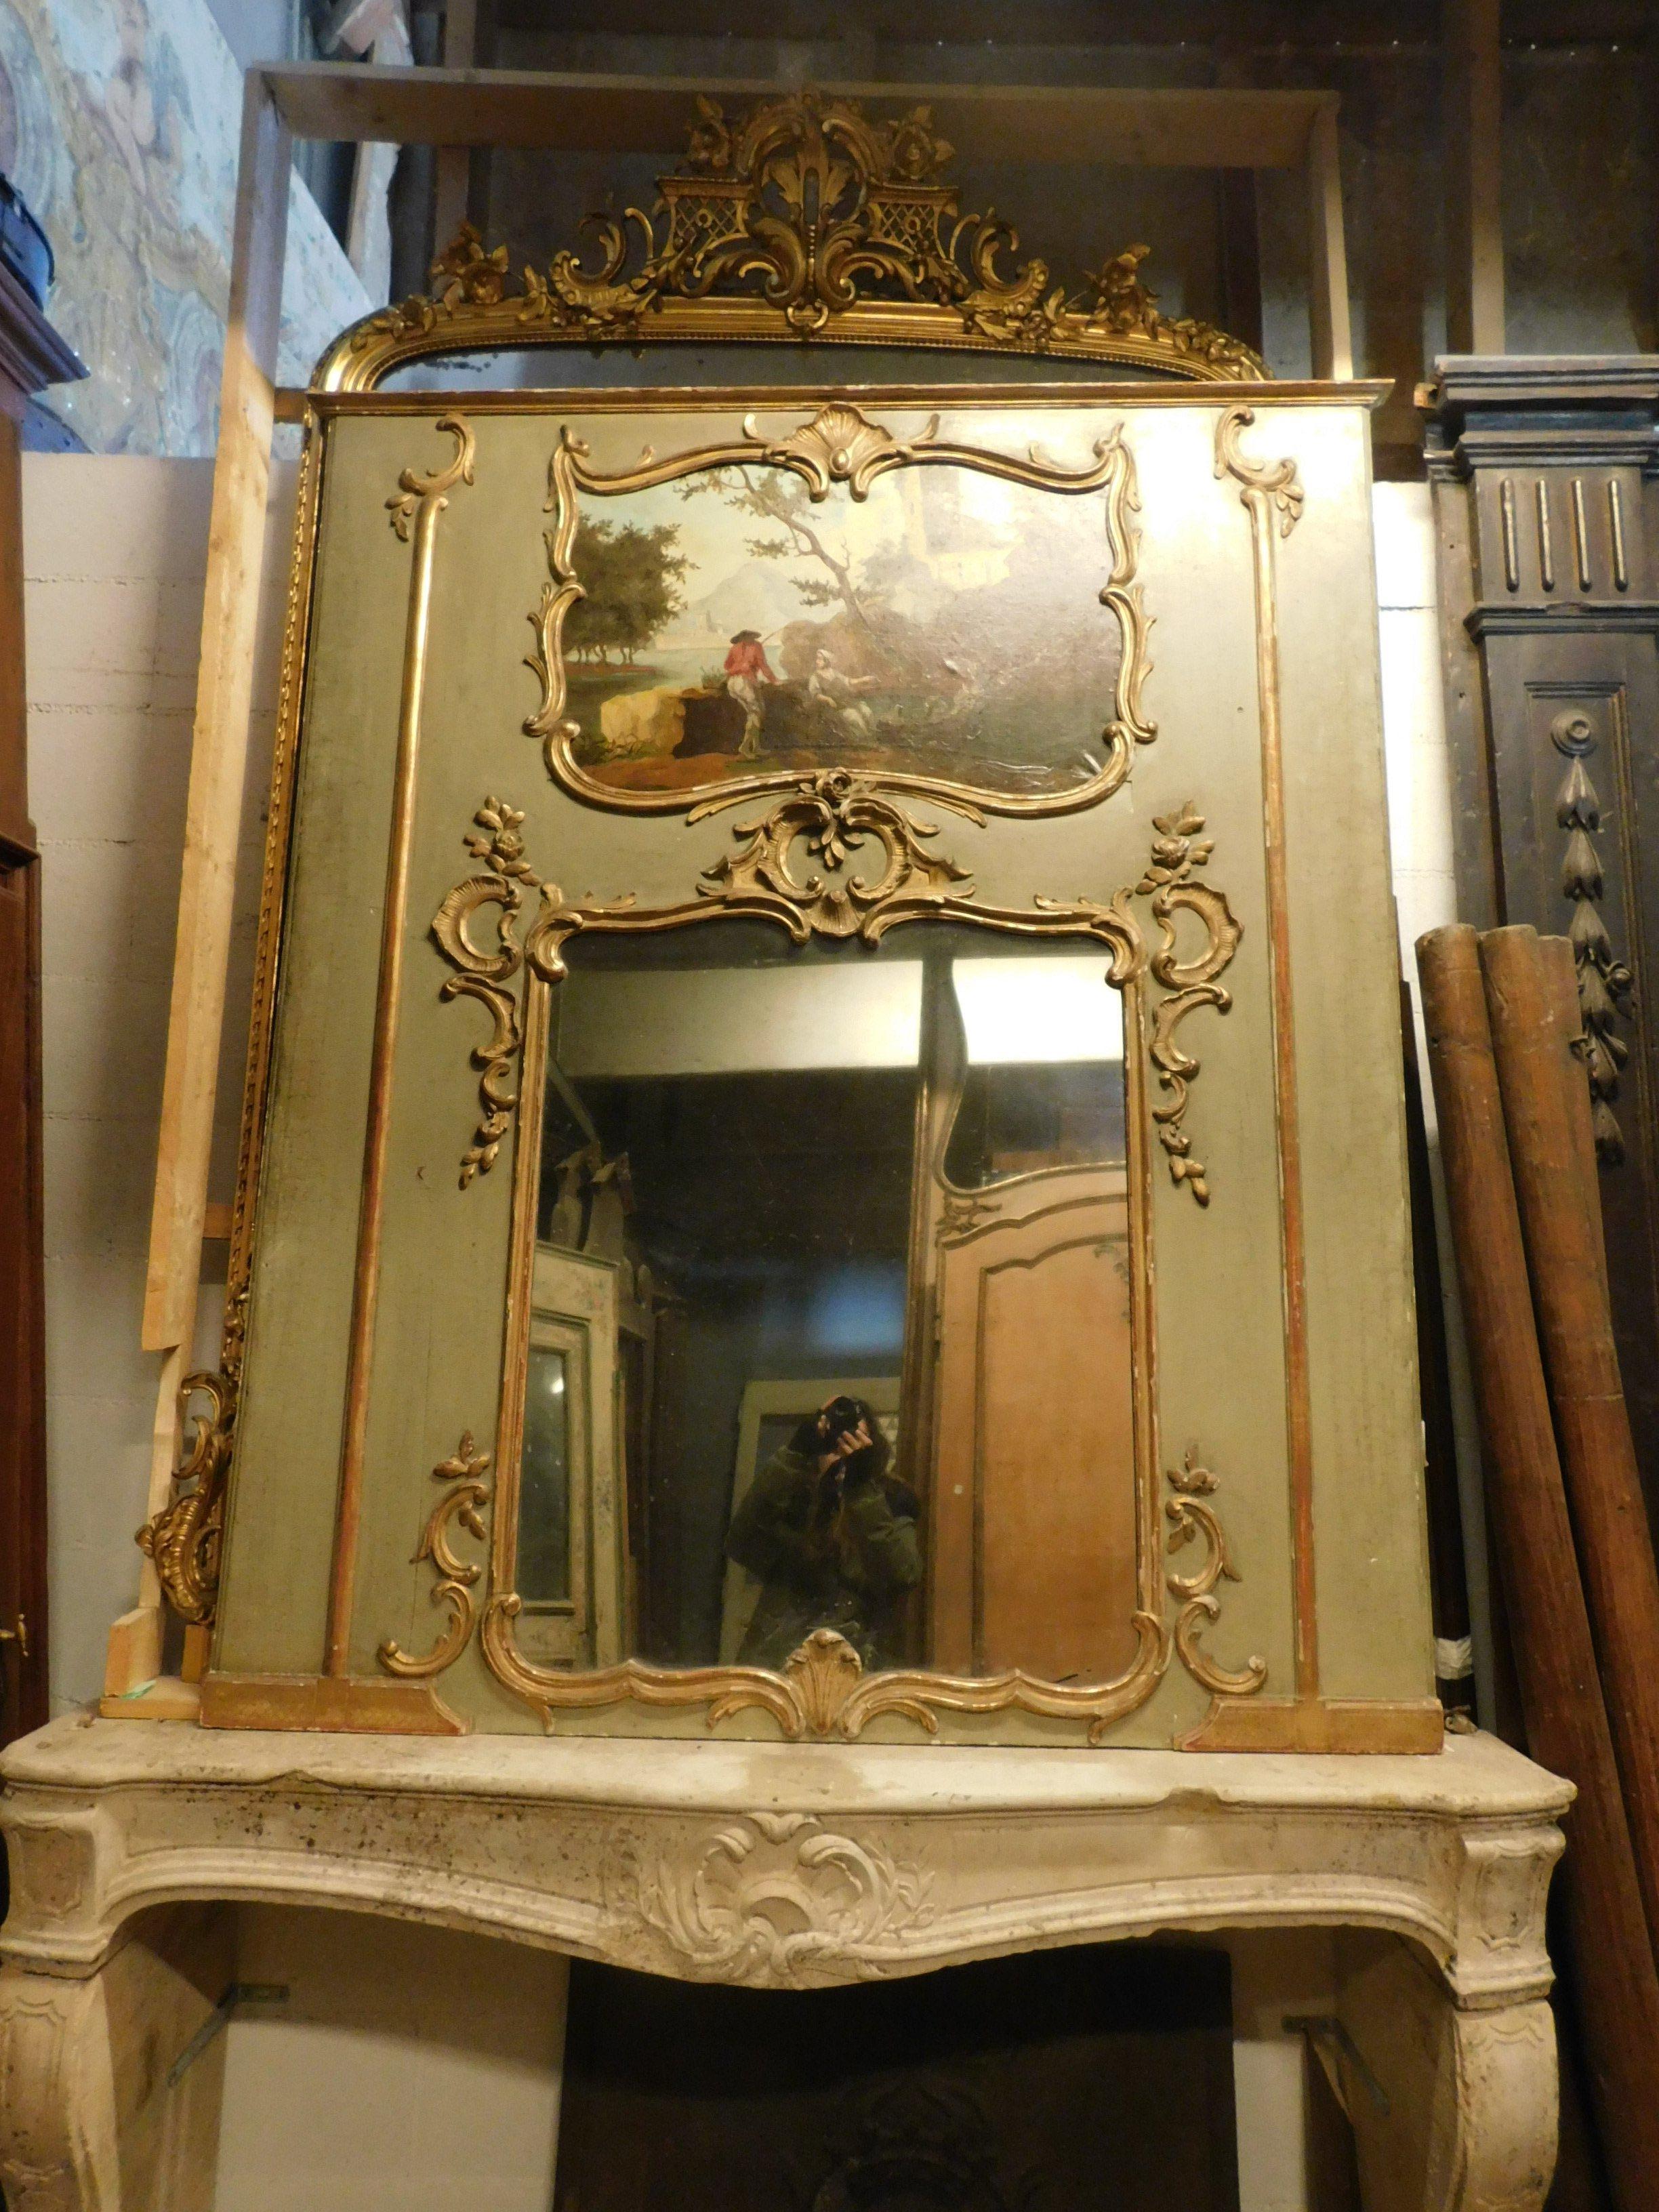 Antique fireplace mirror or console, very high, hand-lacquered in green typical of the '700, Louis XVI style, with gilding in the frames moved and upper painting with social scene, produced mid-700 for the great palace of France.
Ideal for a luxury